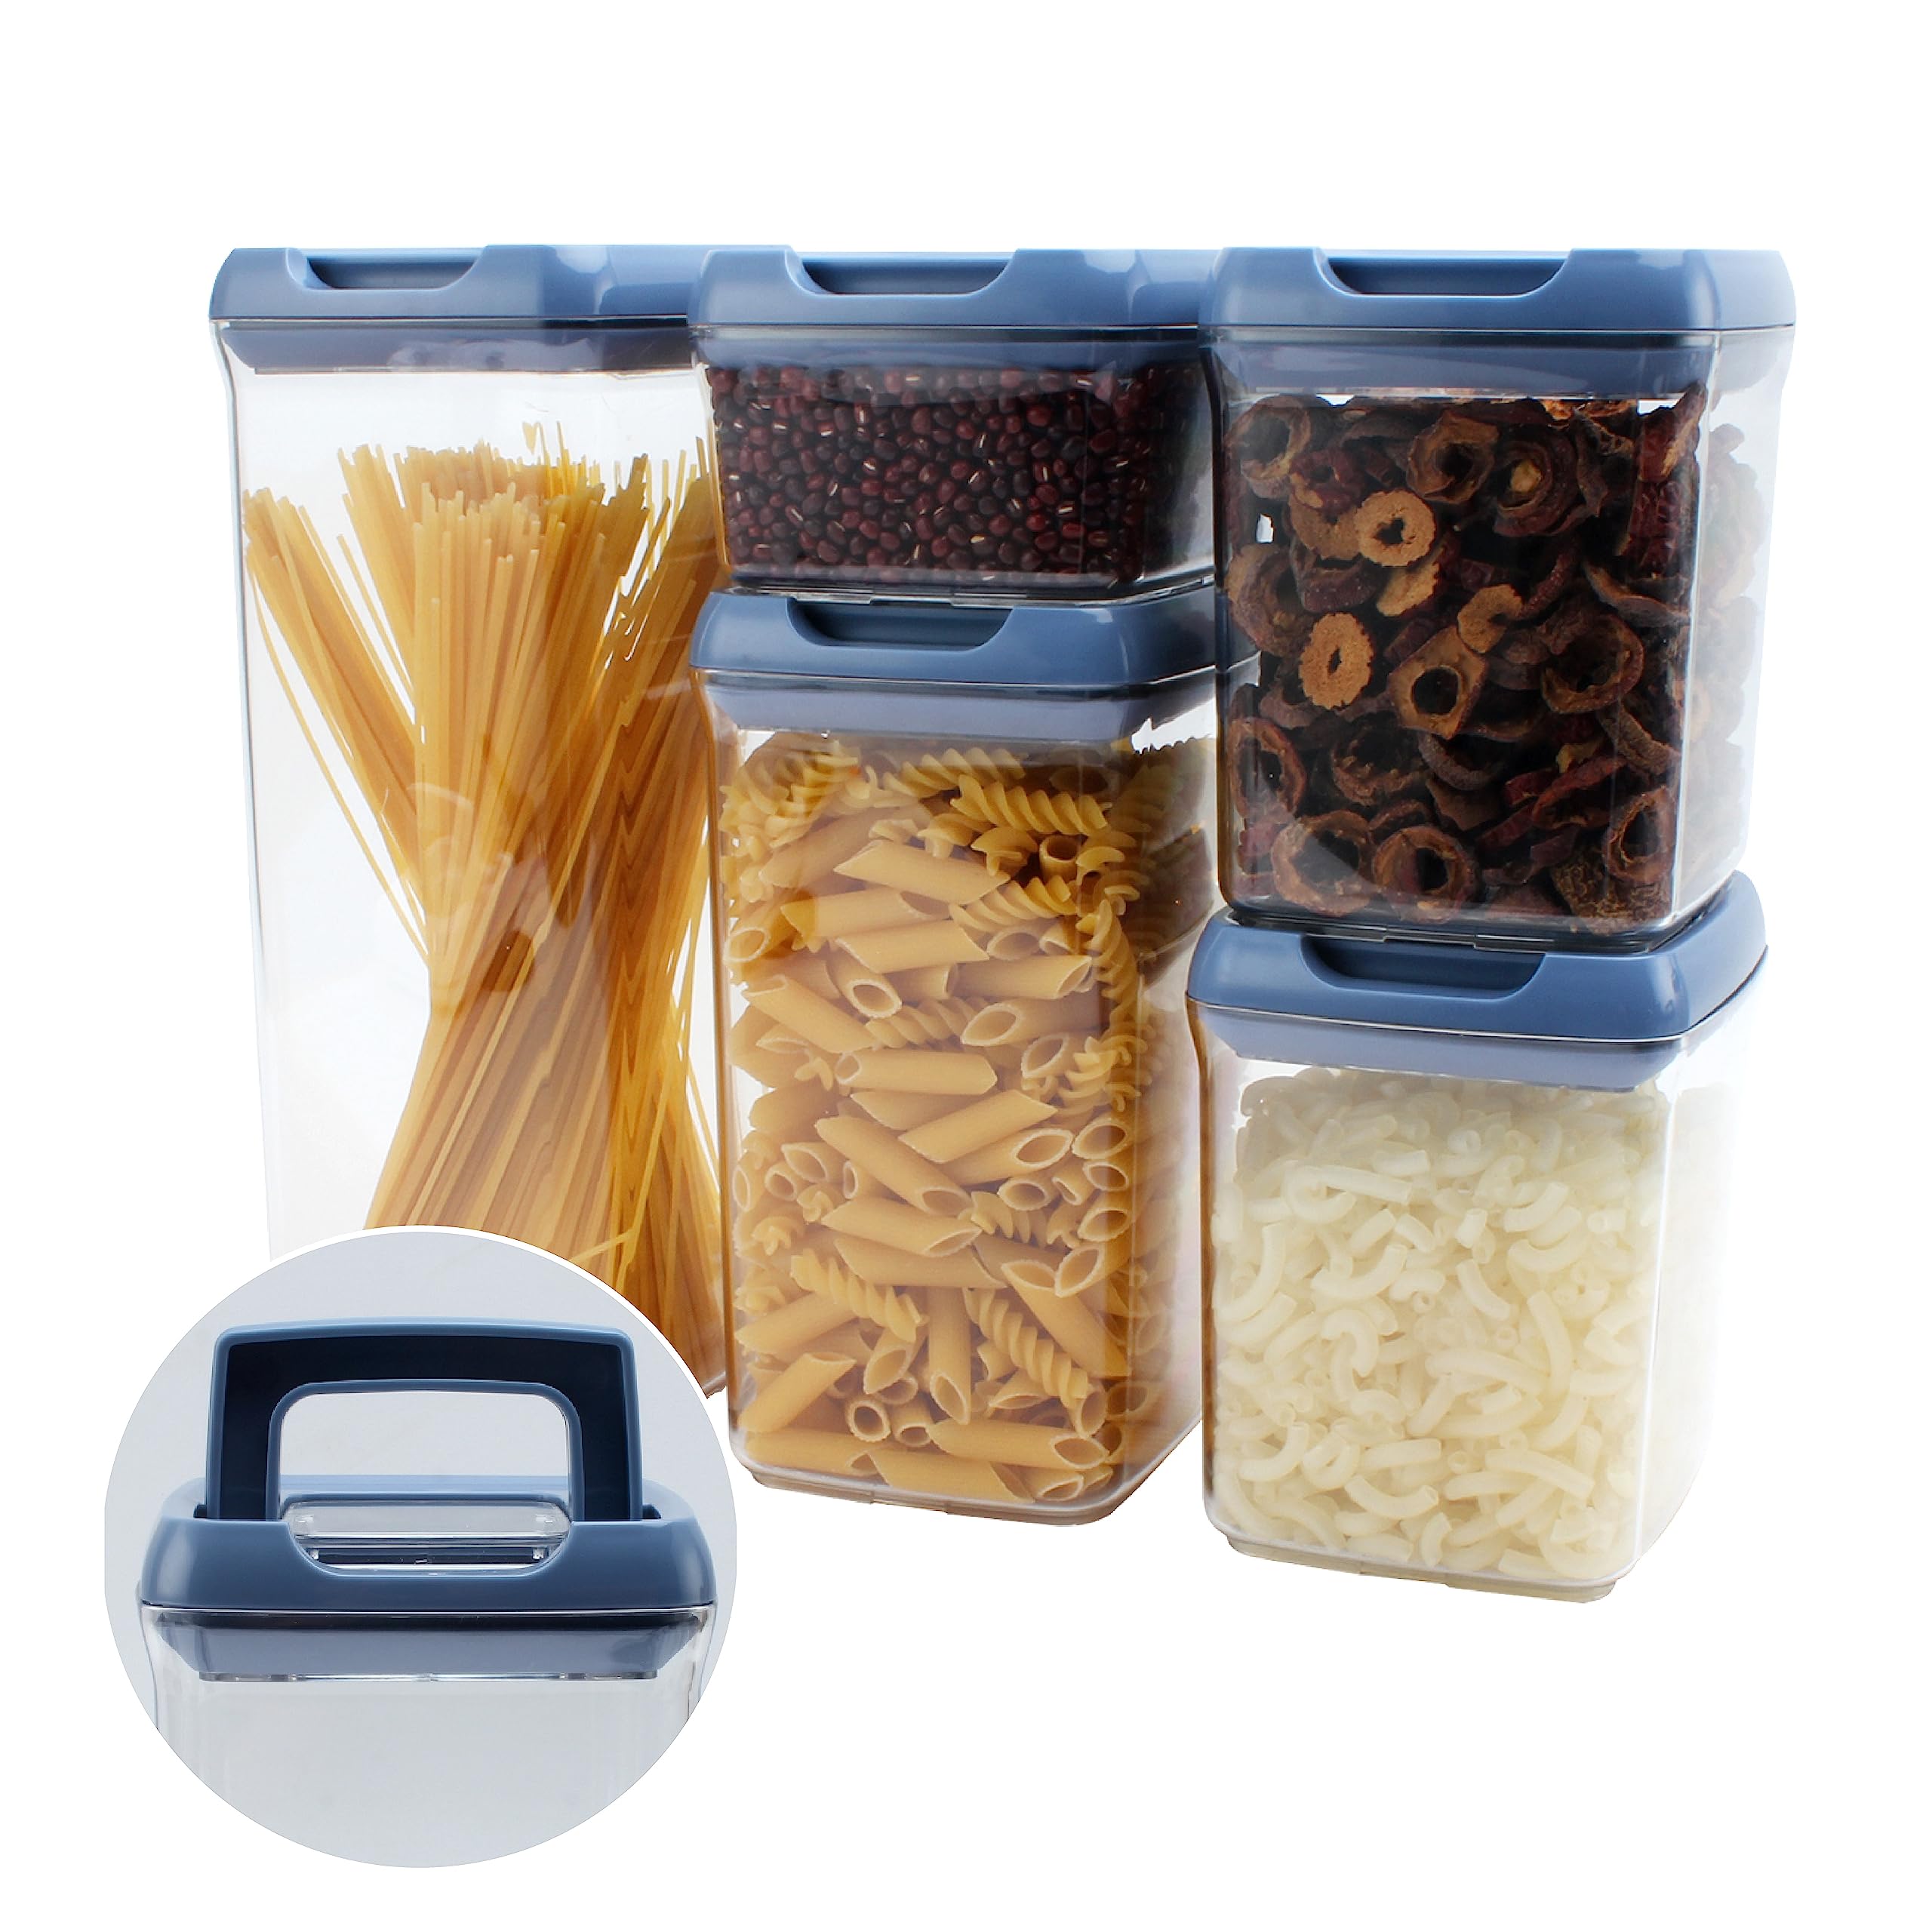 SIMPLEMADE Fliplock Container Set - 5-Piece Airtight, Food Storage Containers for Kitchen Pantry and Fridge Organization - Keep Your Food Fresh and Secure with Easy Flip Lock Lids  - Like New